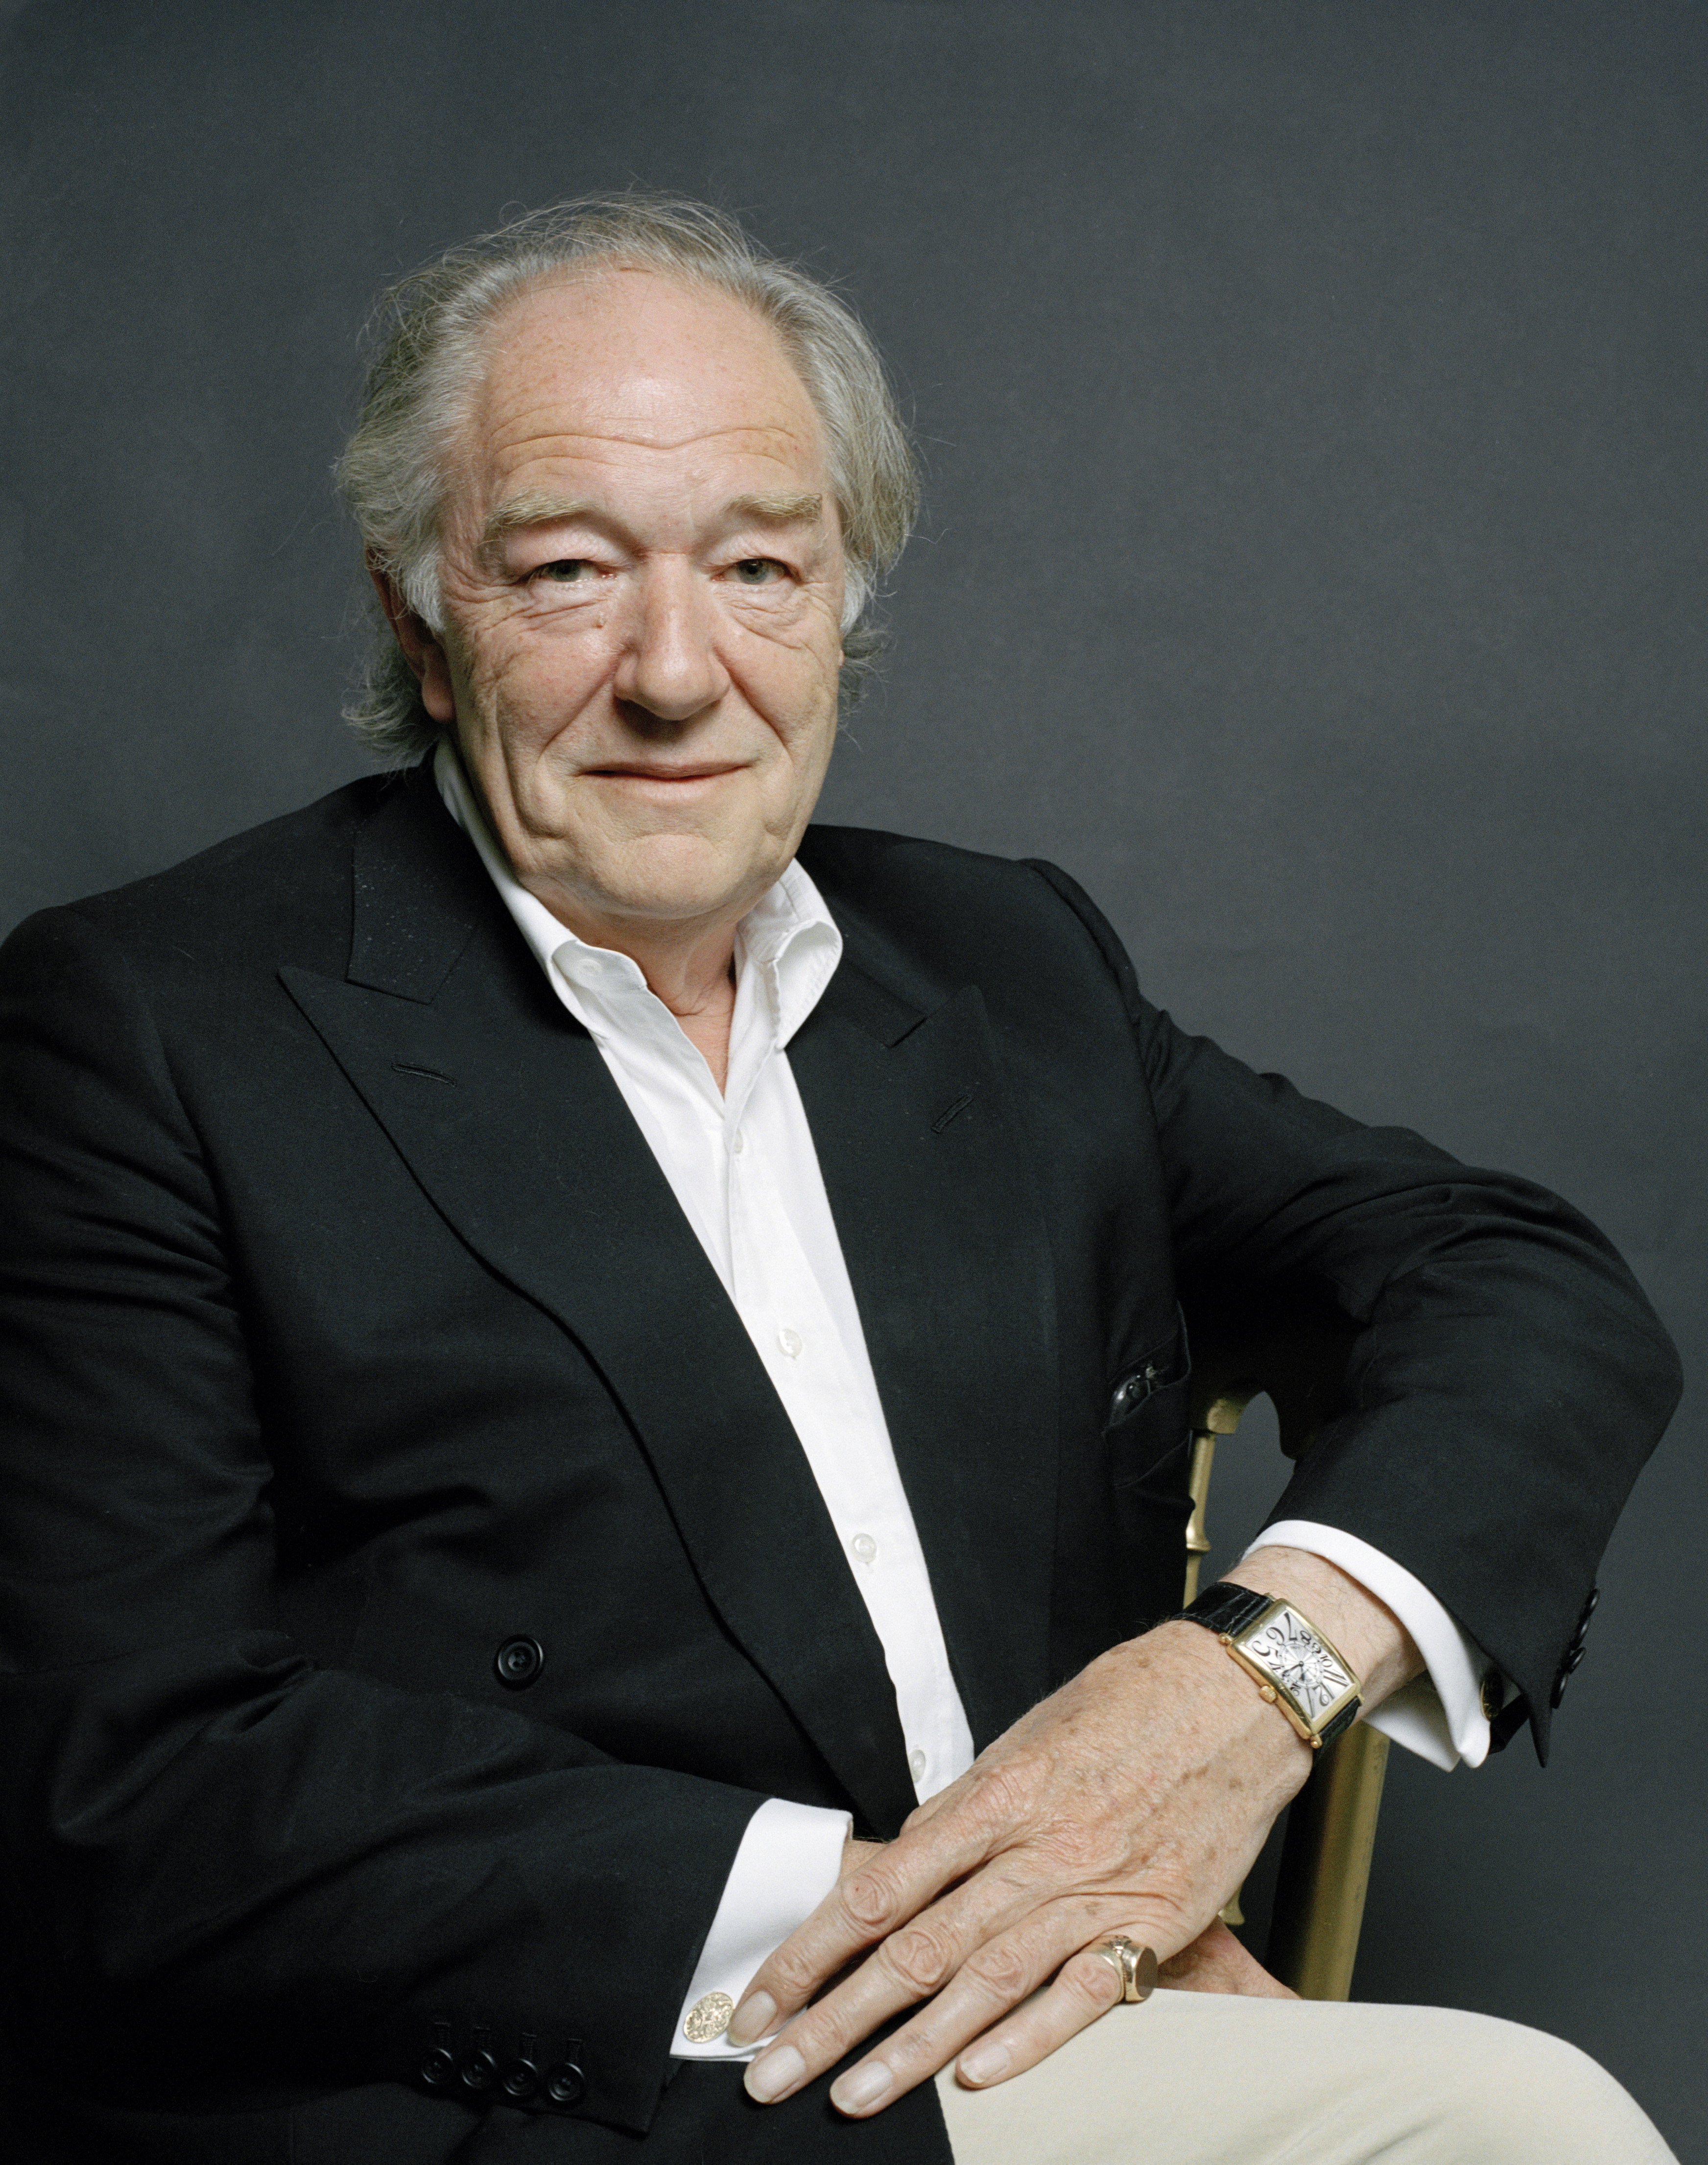 Sir Michael Gambon posing in a close-up image on July 1, 2006 | Source: Getty Images